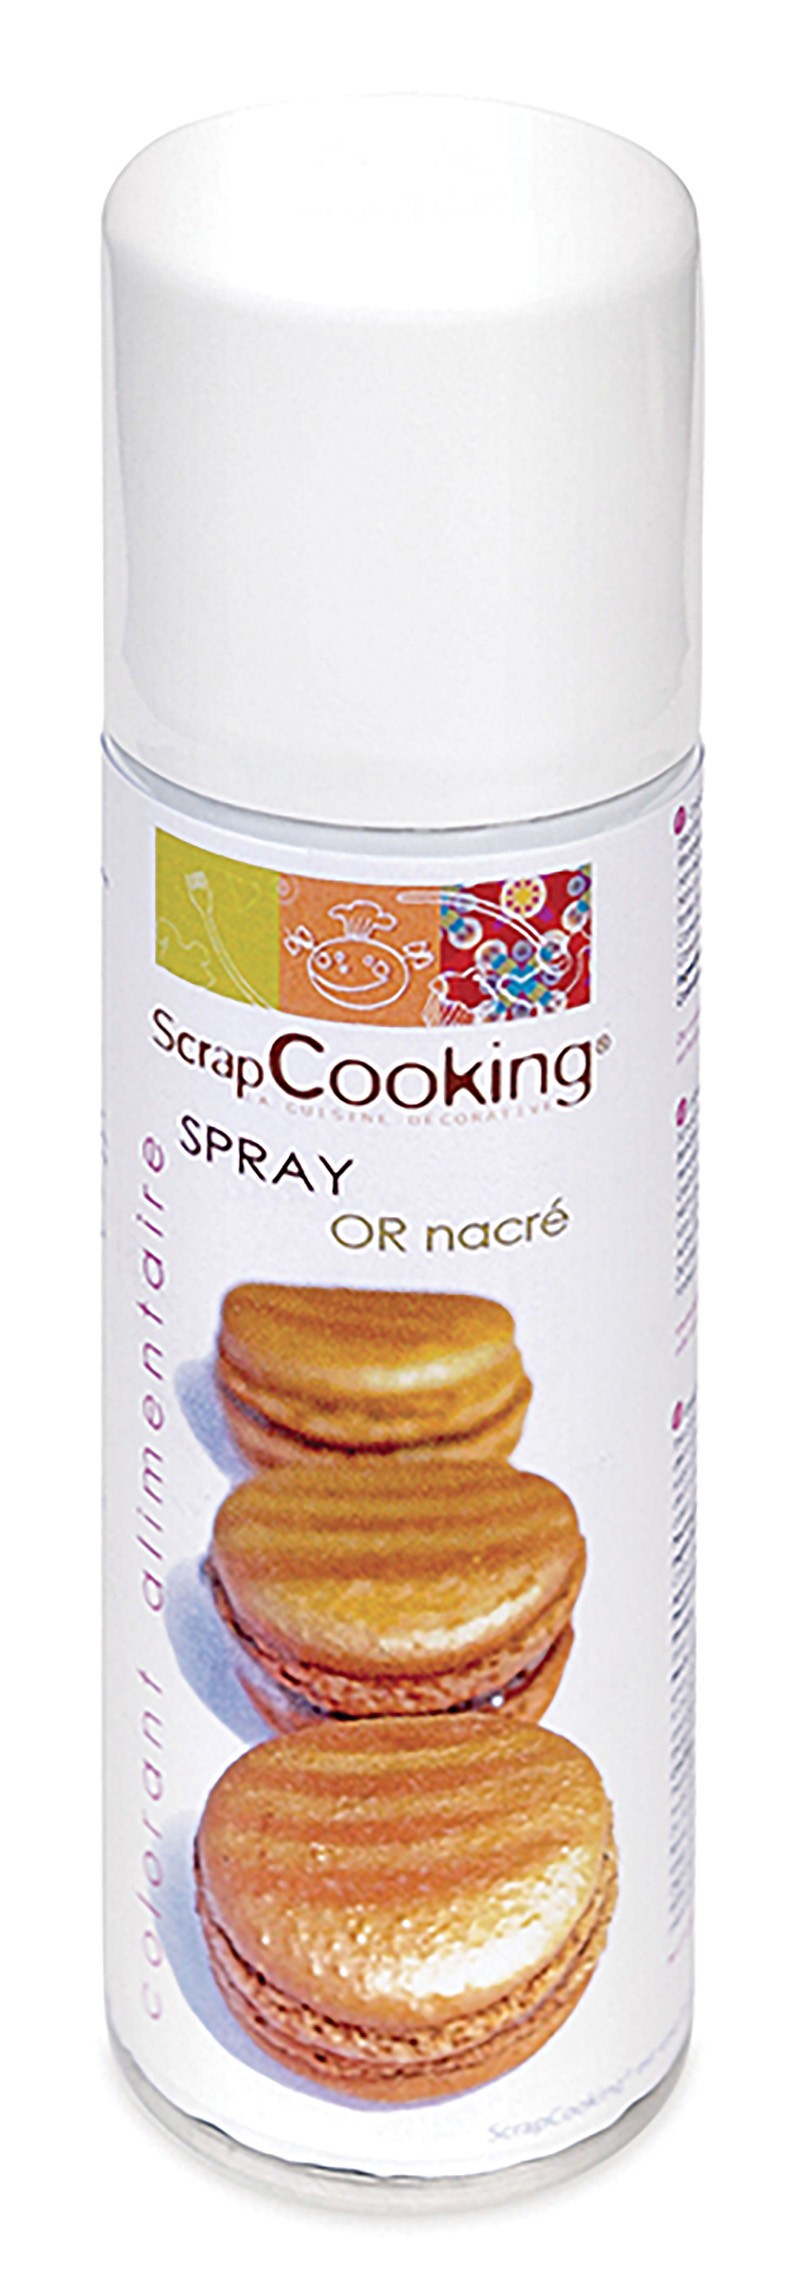 Fast test : spray alimentaire or nacré Scrap Cooking 